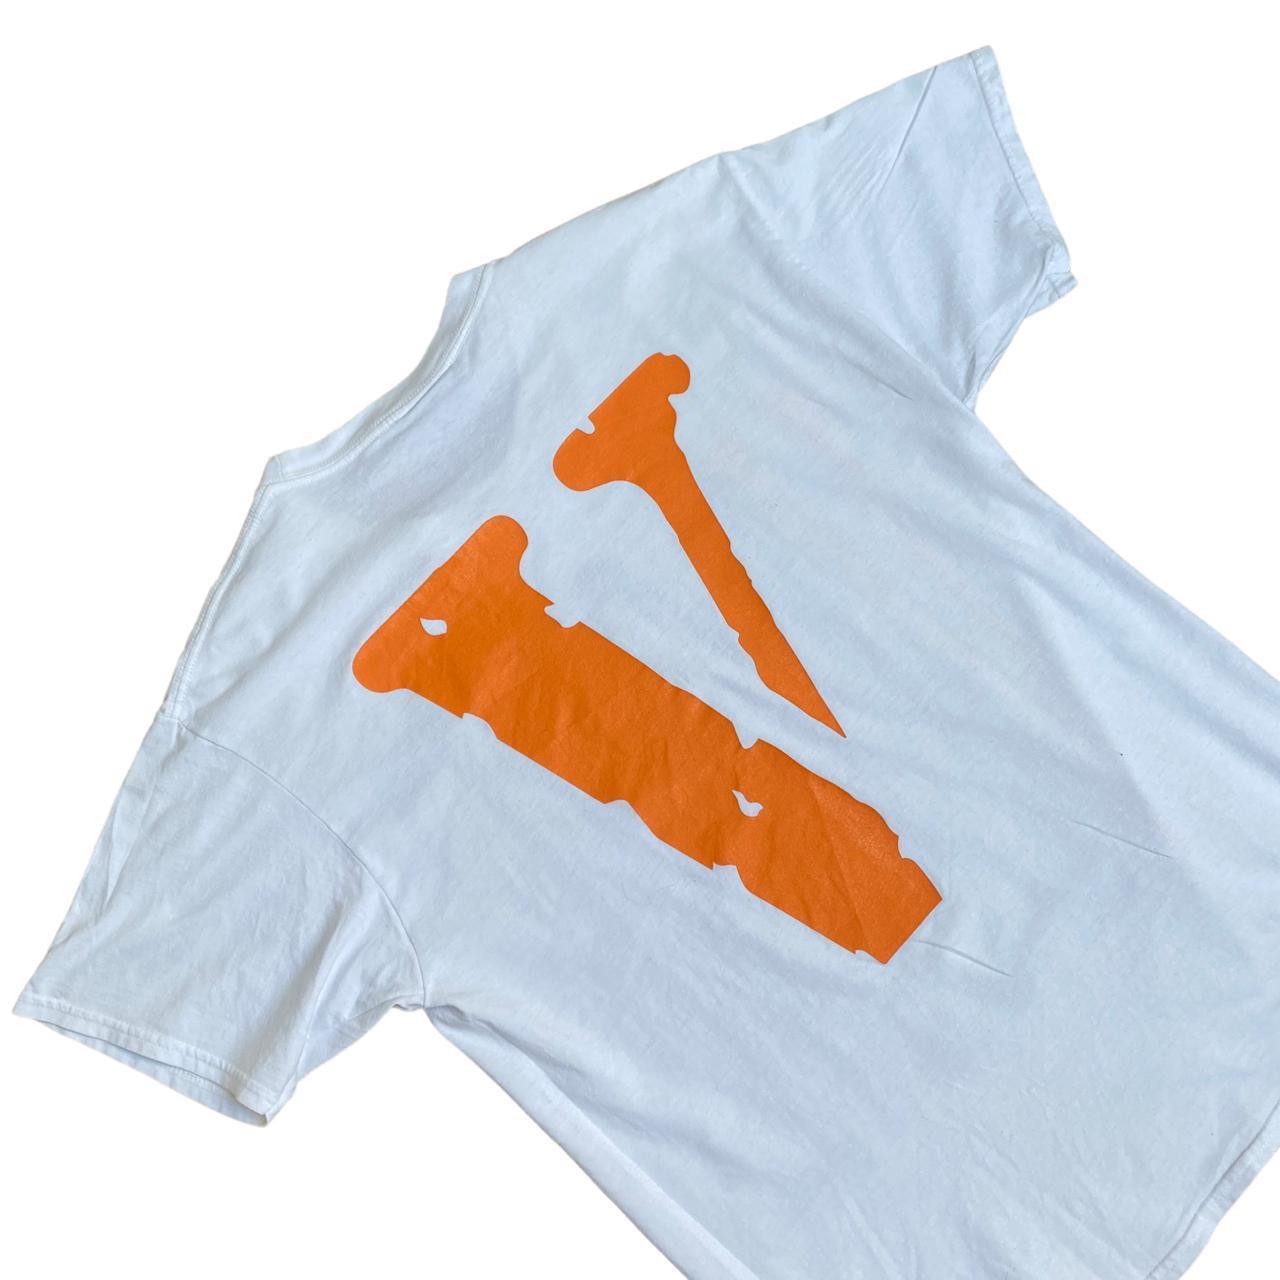 Vlone Front and back Logo Tee Orange (M) - Known Source